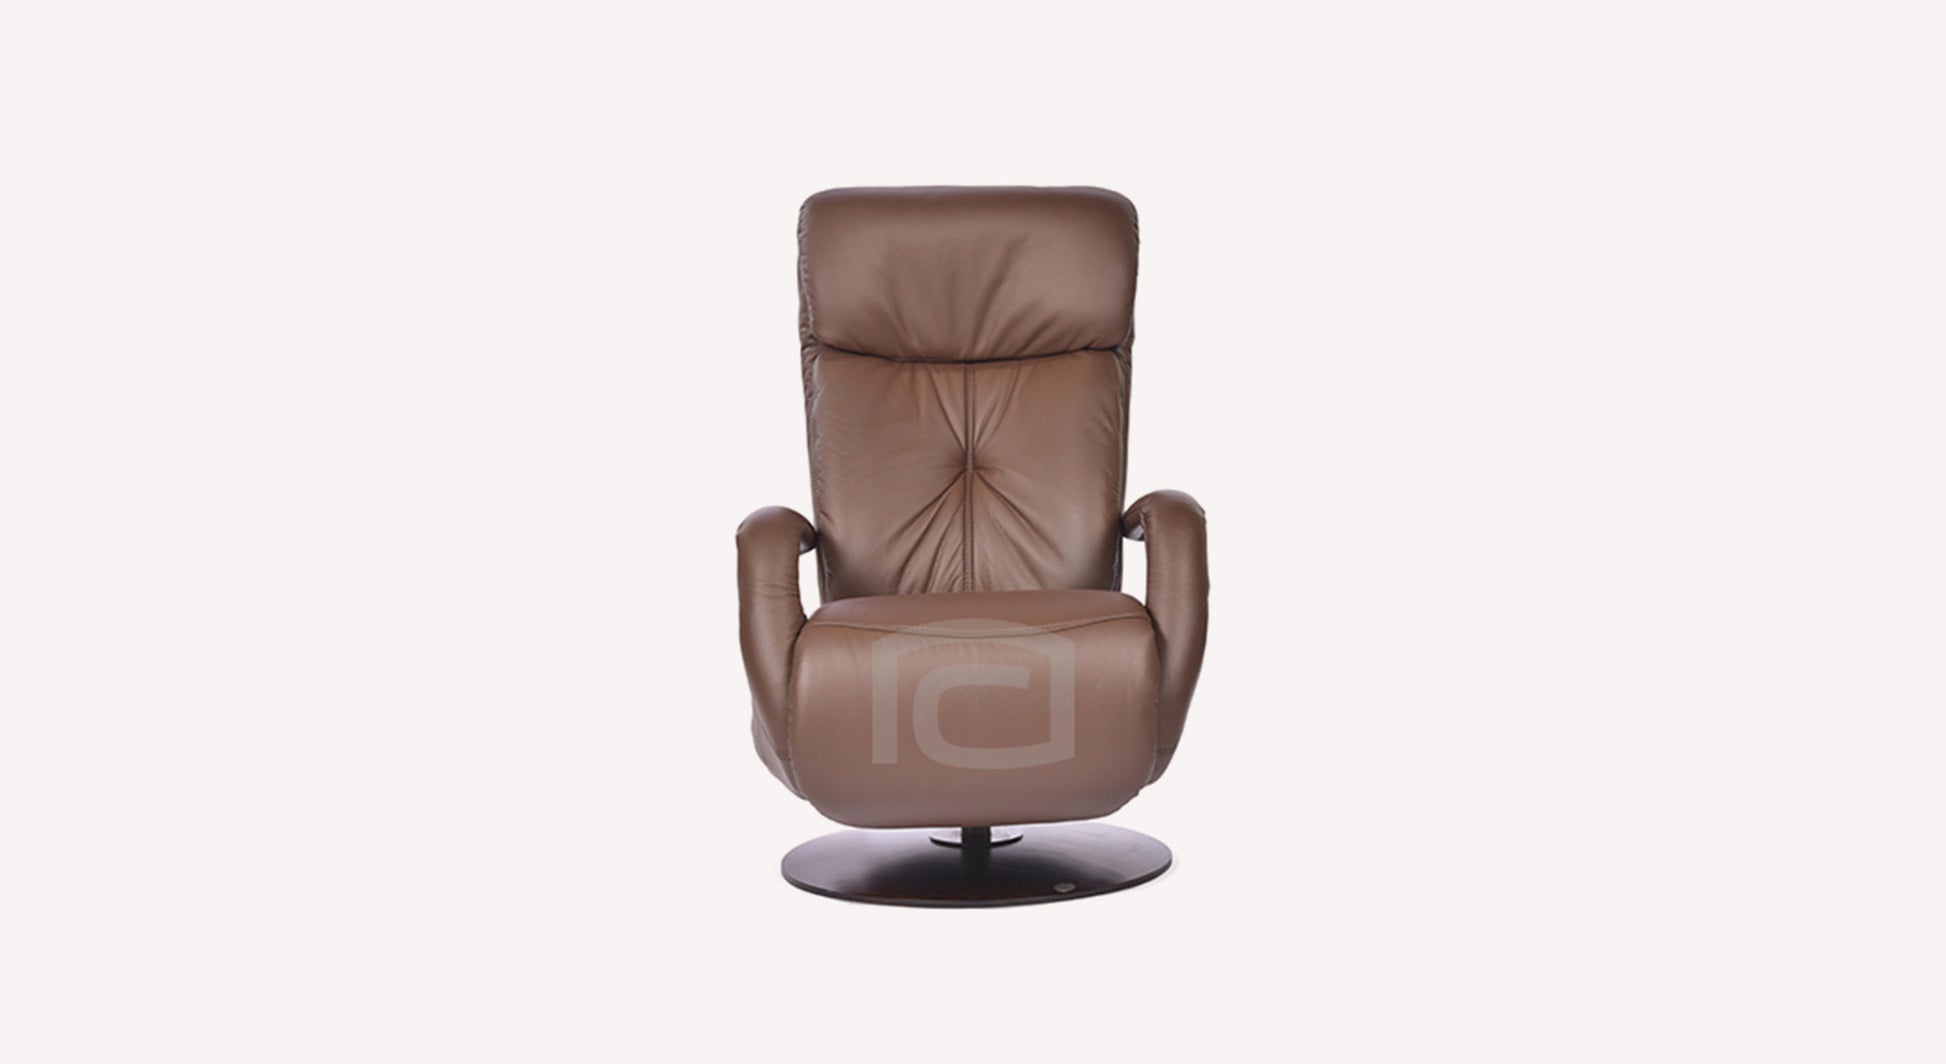 Fauteuil Relax 7242 Easywing +50 tissus & cuirs au choix